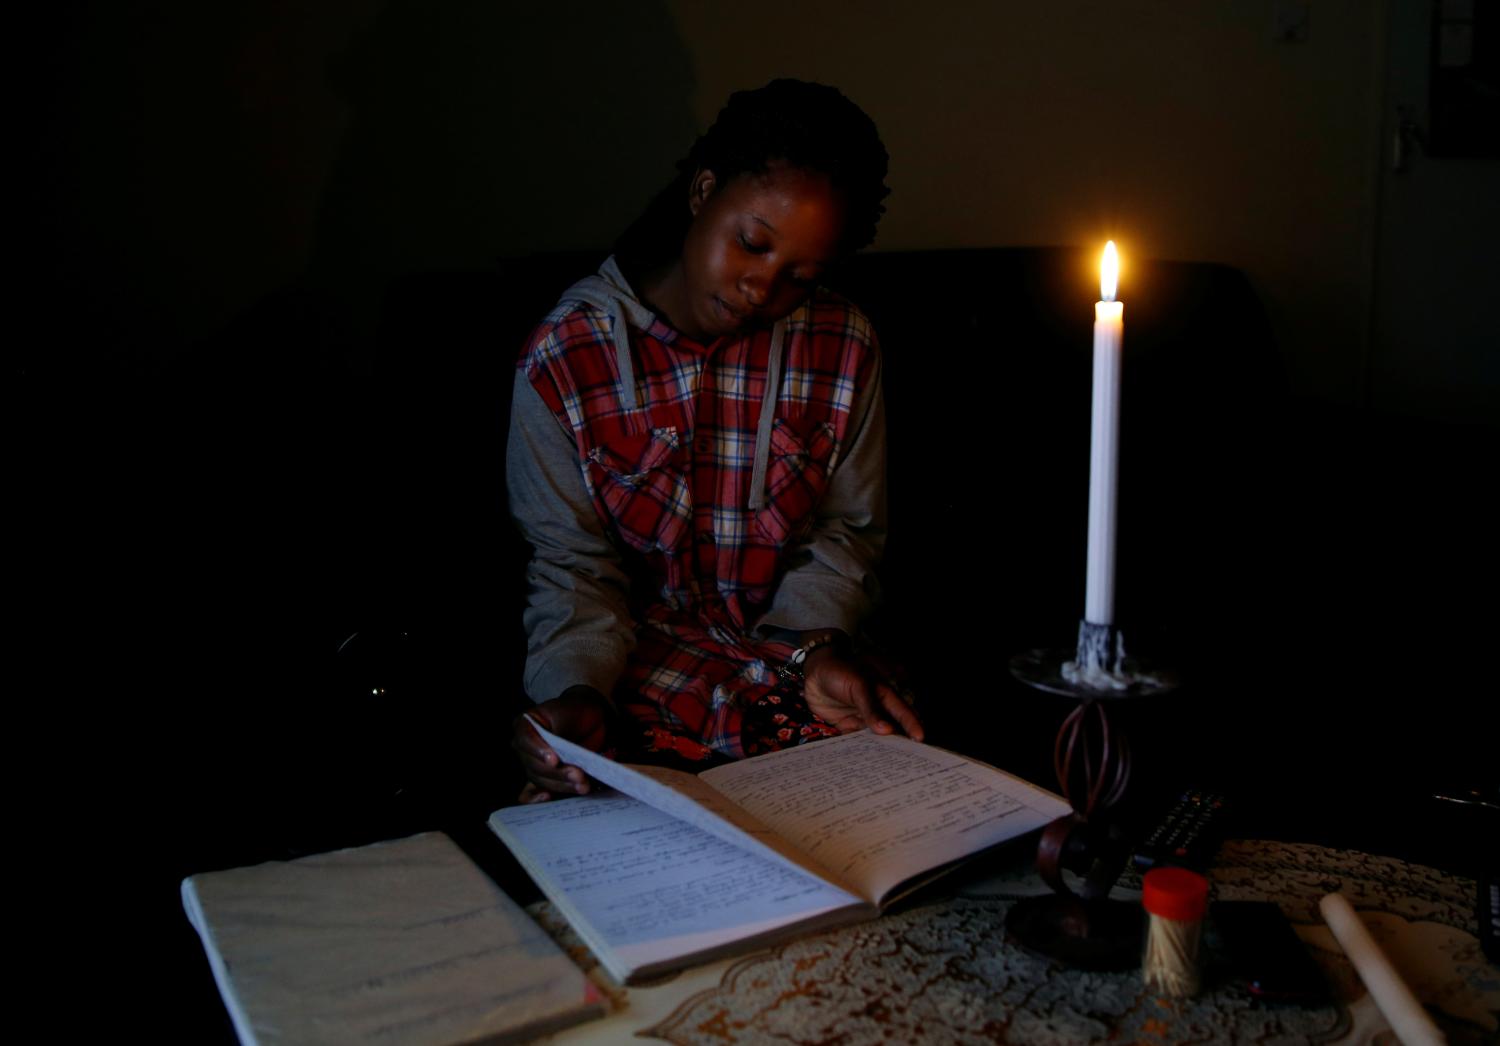 Student Rutendo Madziva reads by candlelight during an electrical power cut in Marondera, Zimbabwe, May 14, 2019. Picture taken May 14, 2019.REUTERS/Philimon Bulawayo - RC1F73894D30